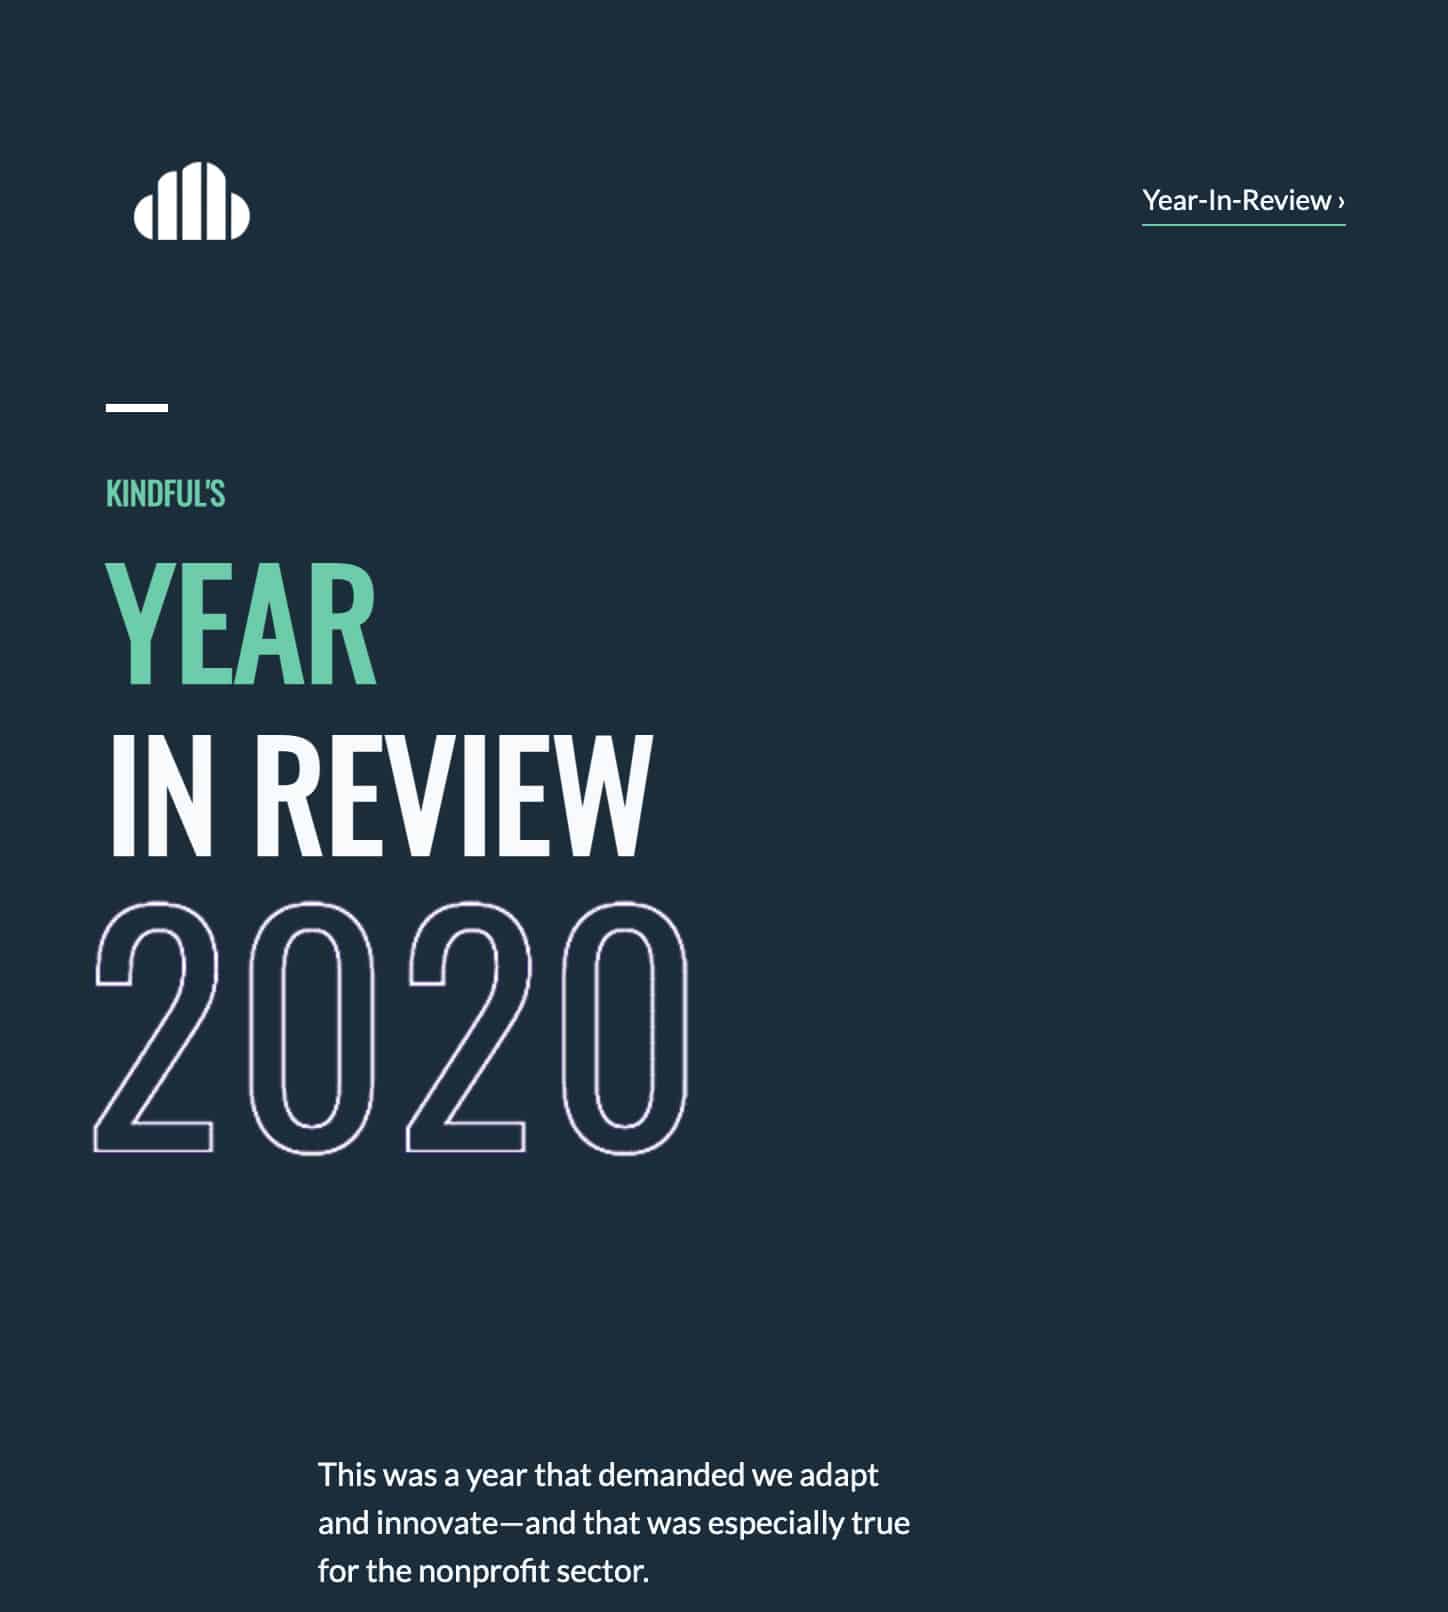 This is the full image of Kindful's 2020 Year-In-Review email, highlighting the stats from the above blog post.